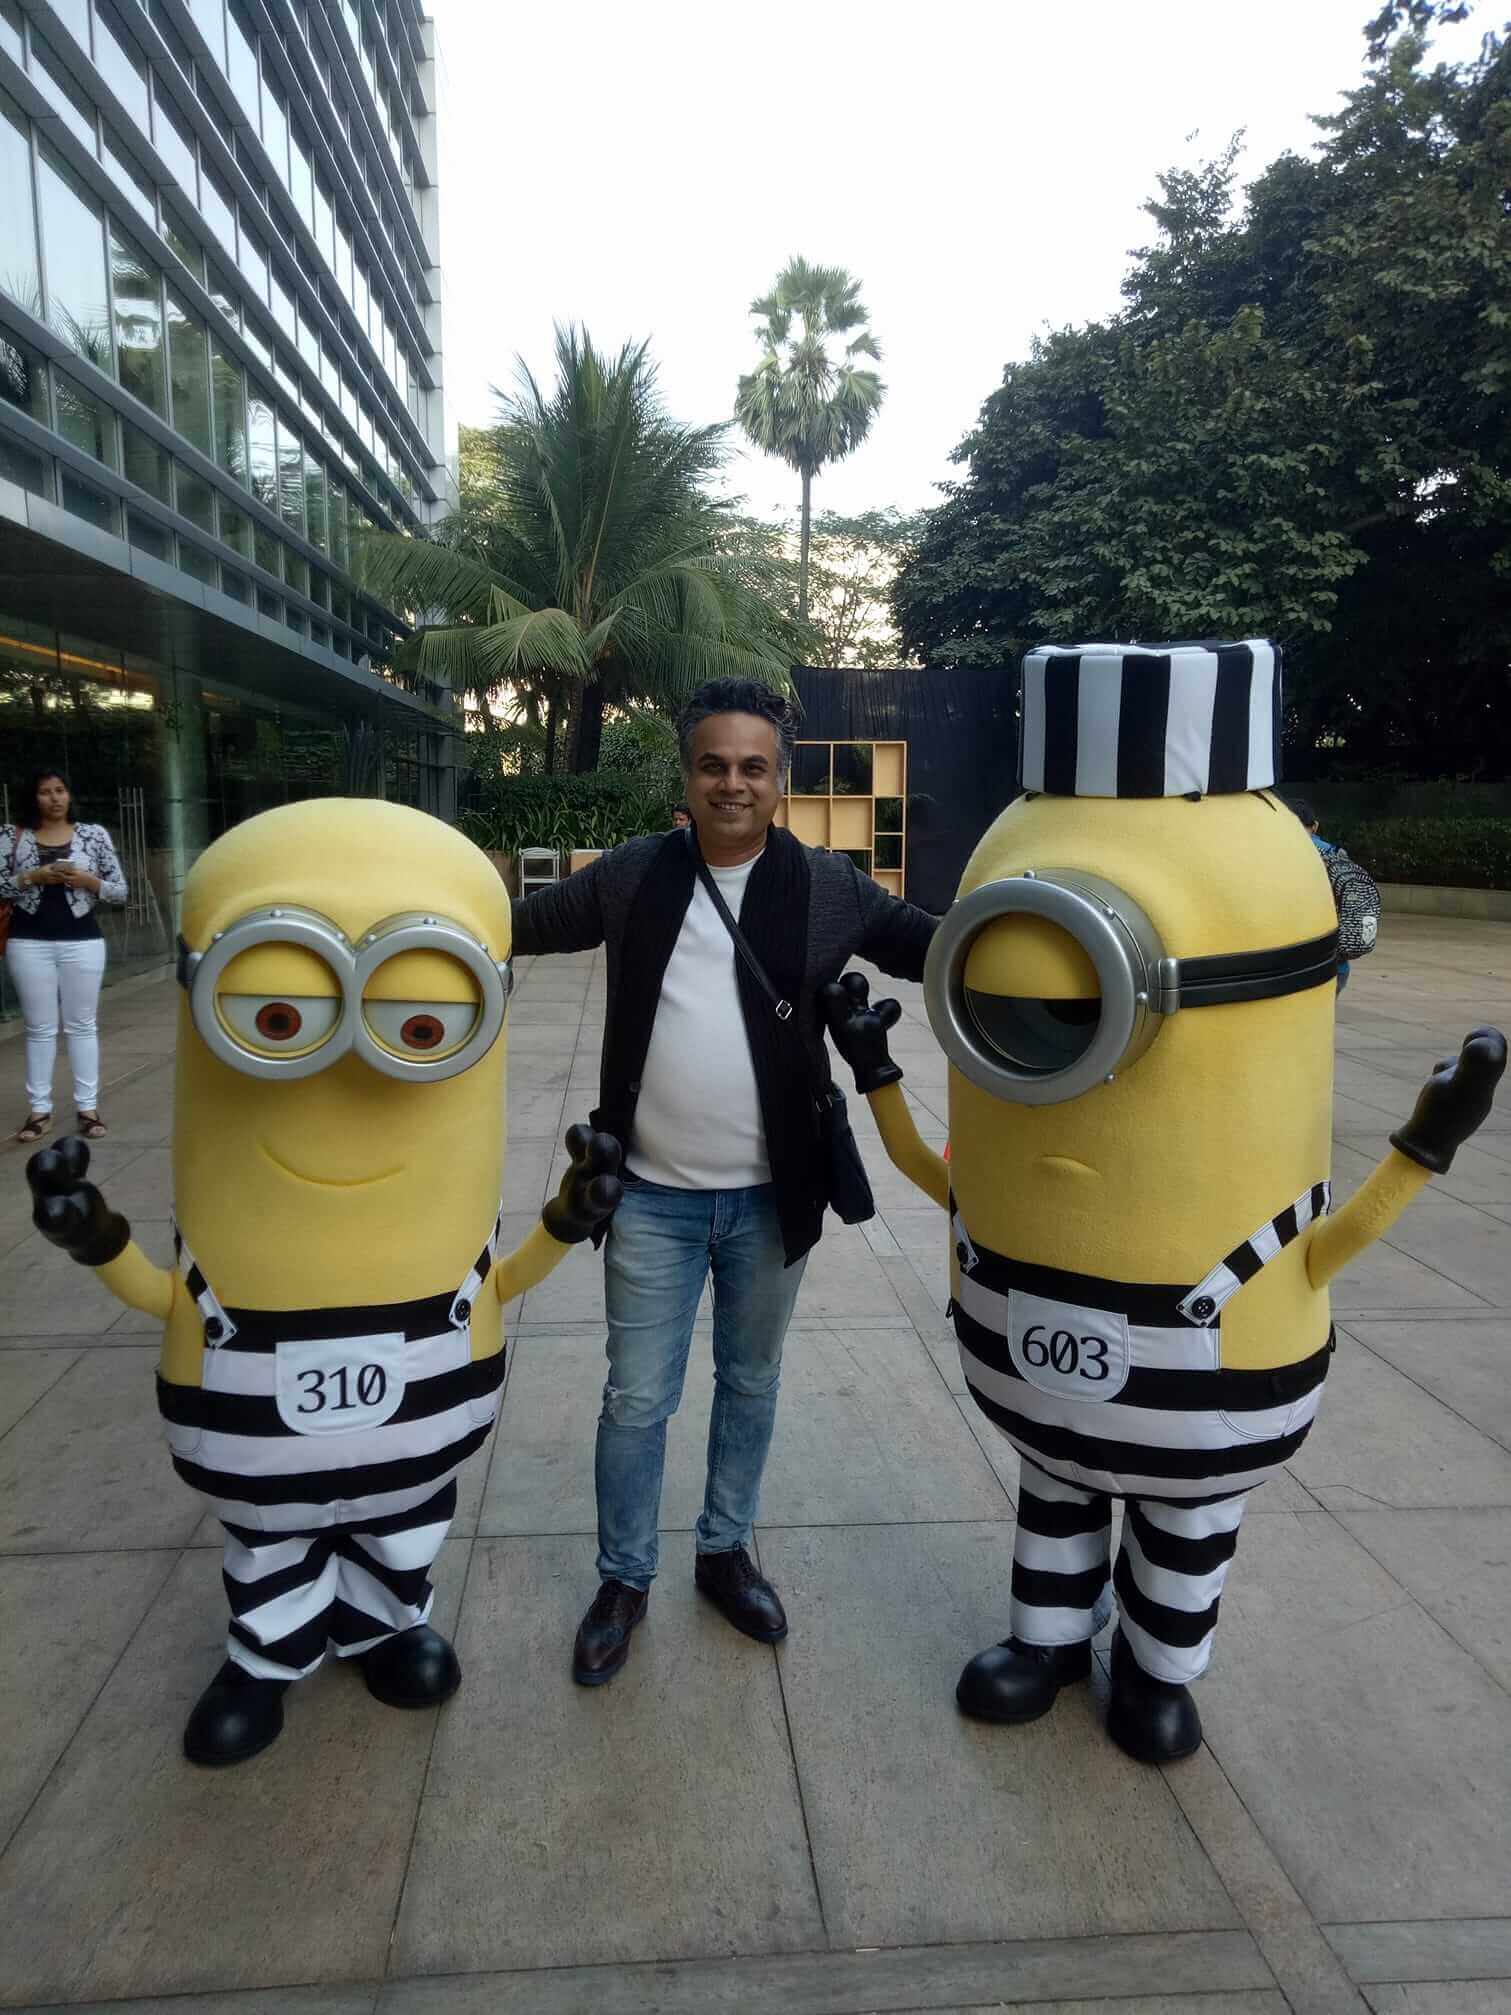 With the Minions